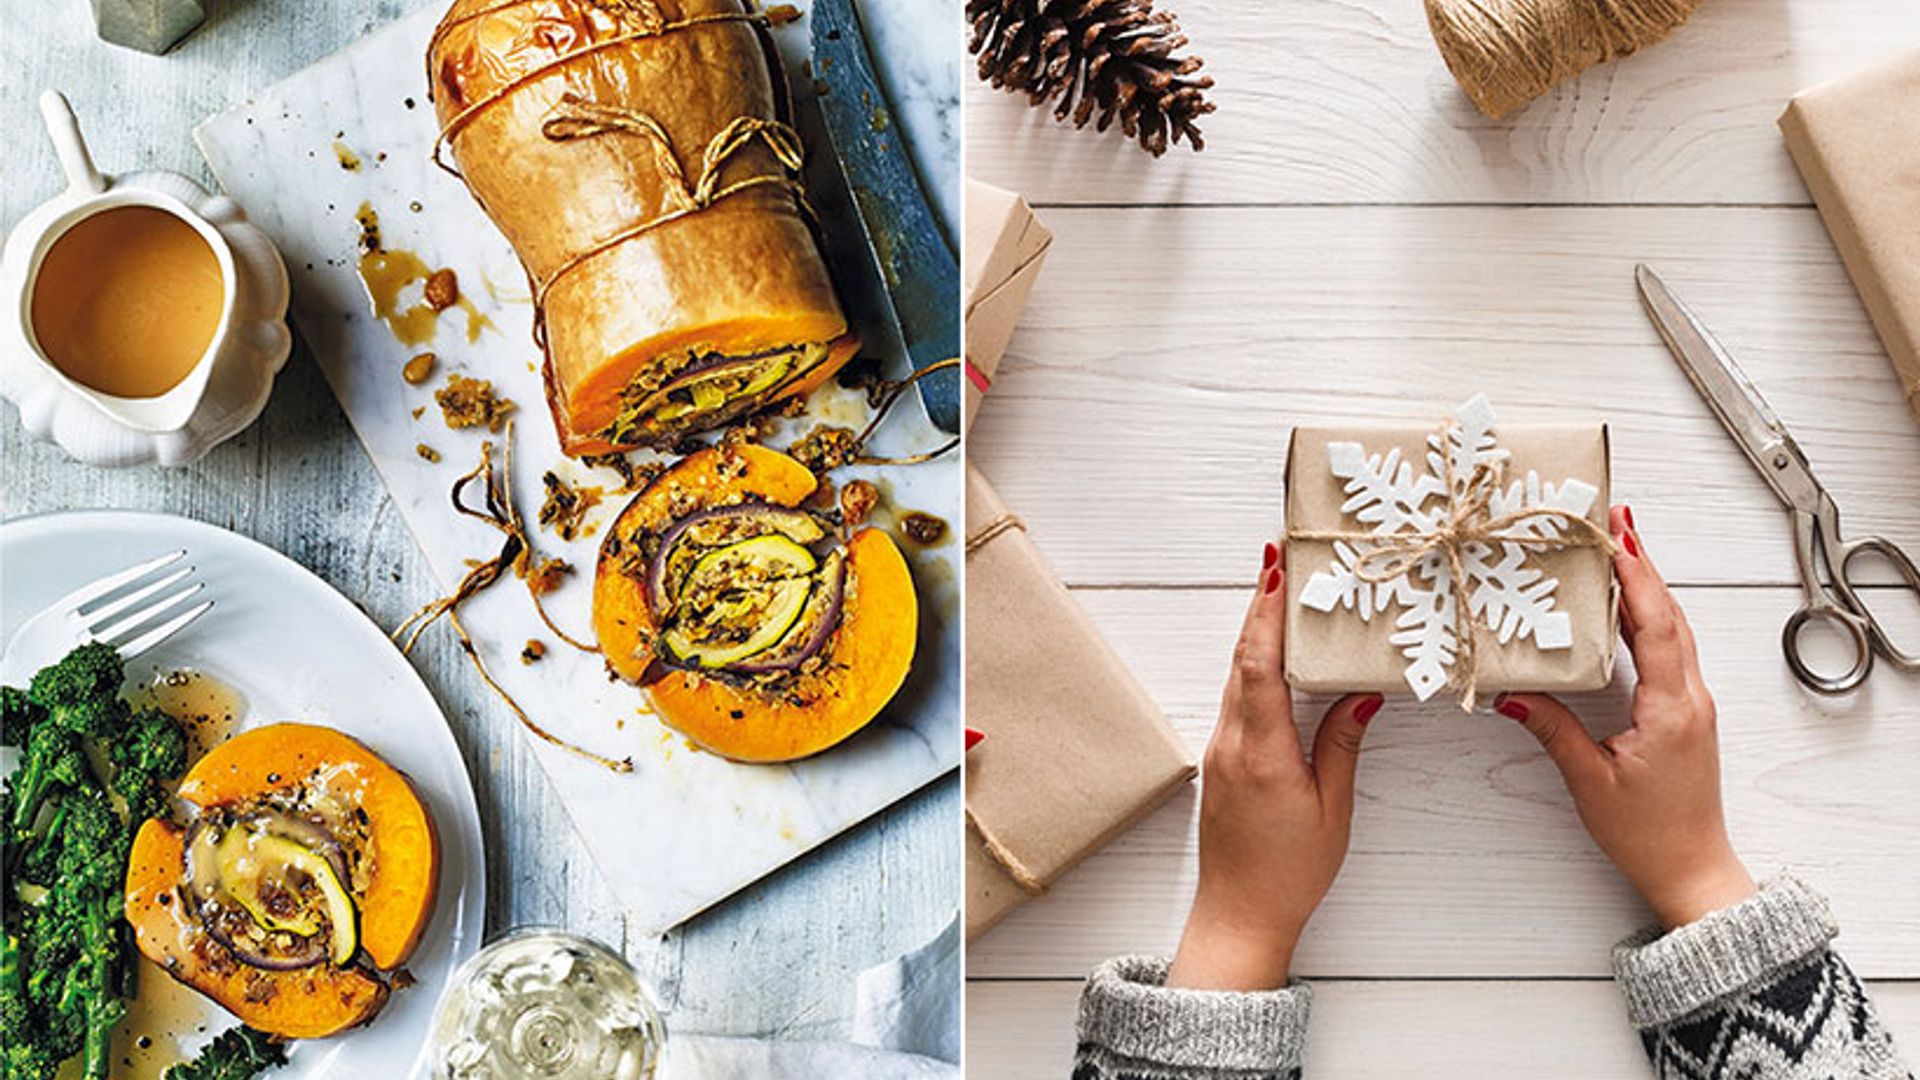 Looking for Christmas inspiration? These are the food and décor trends to try